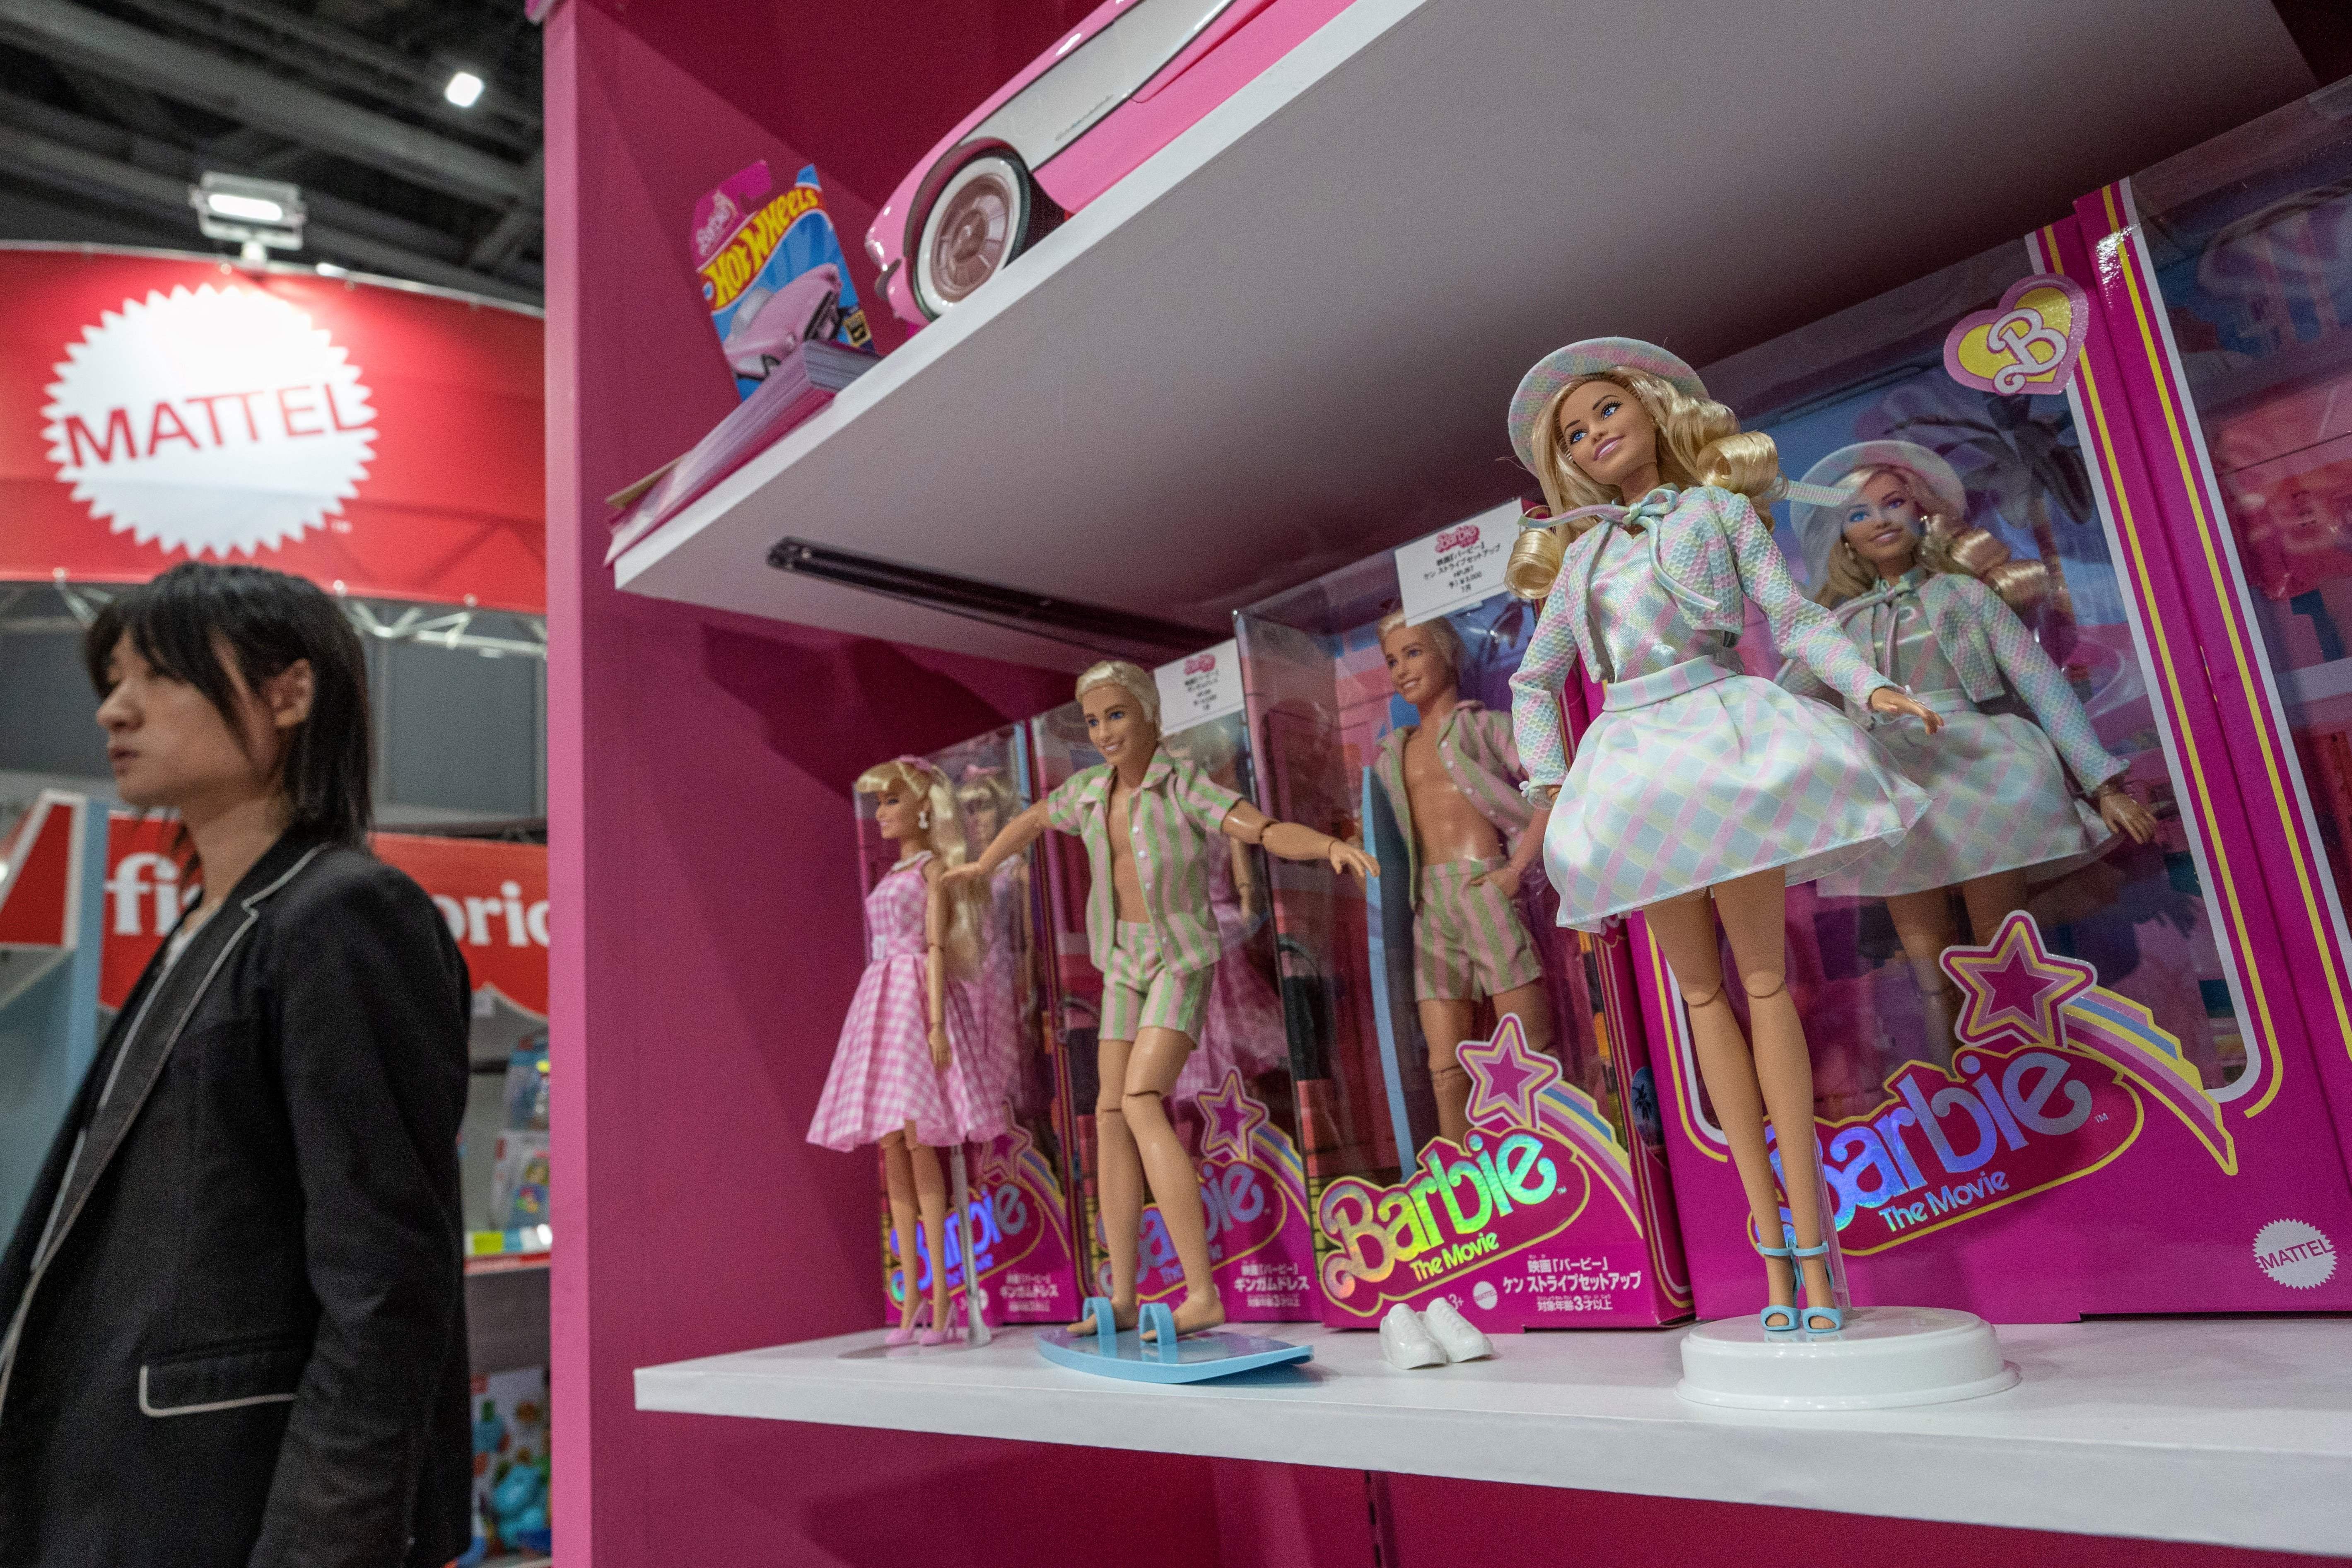 Meet the 15 Kens in Mattel's New Doll Line